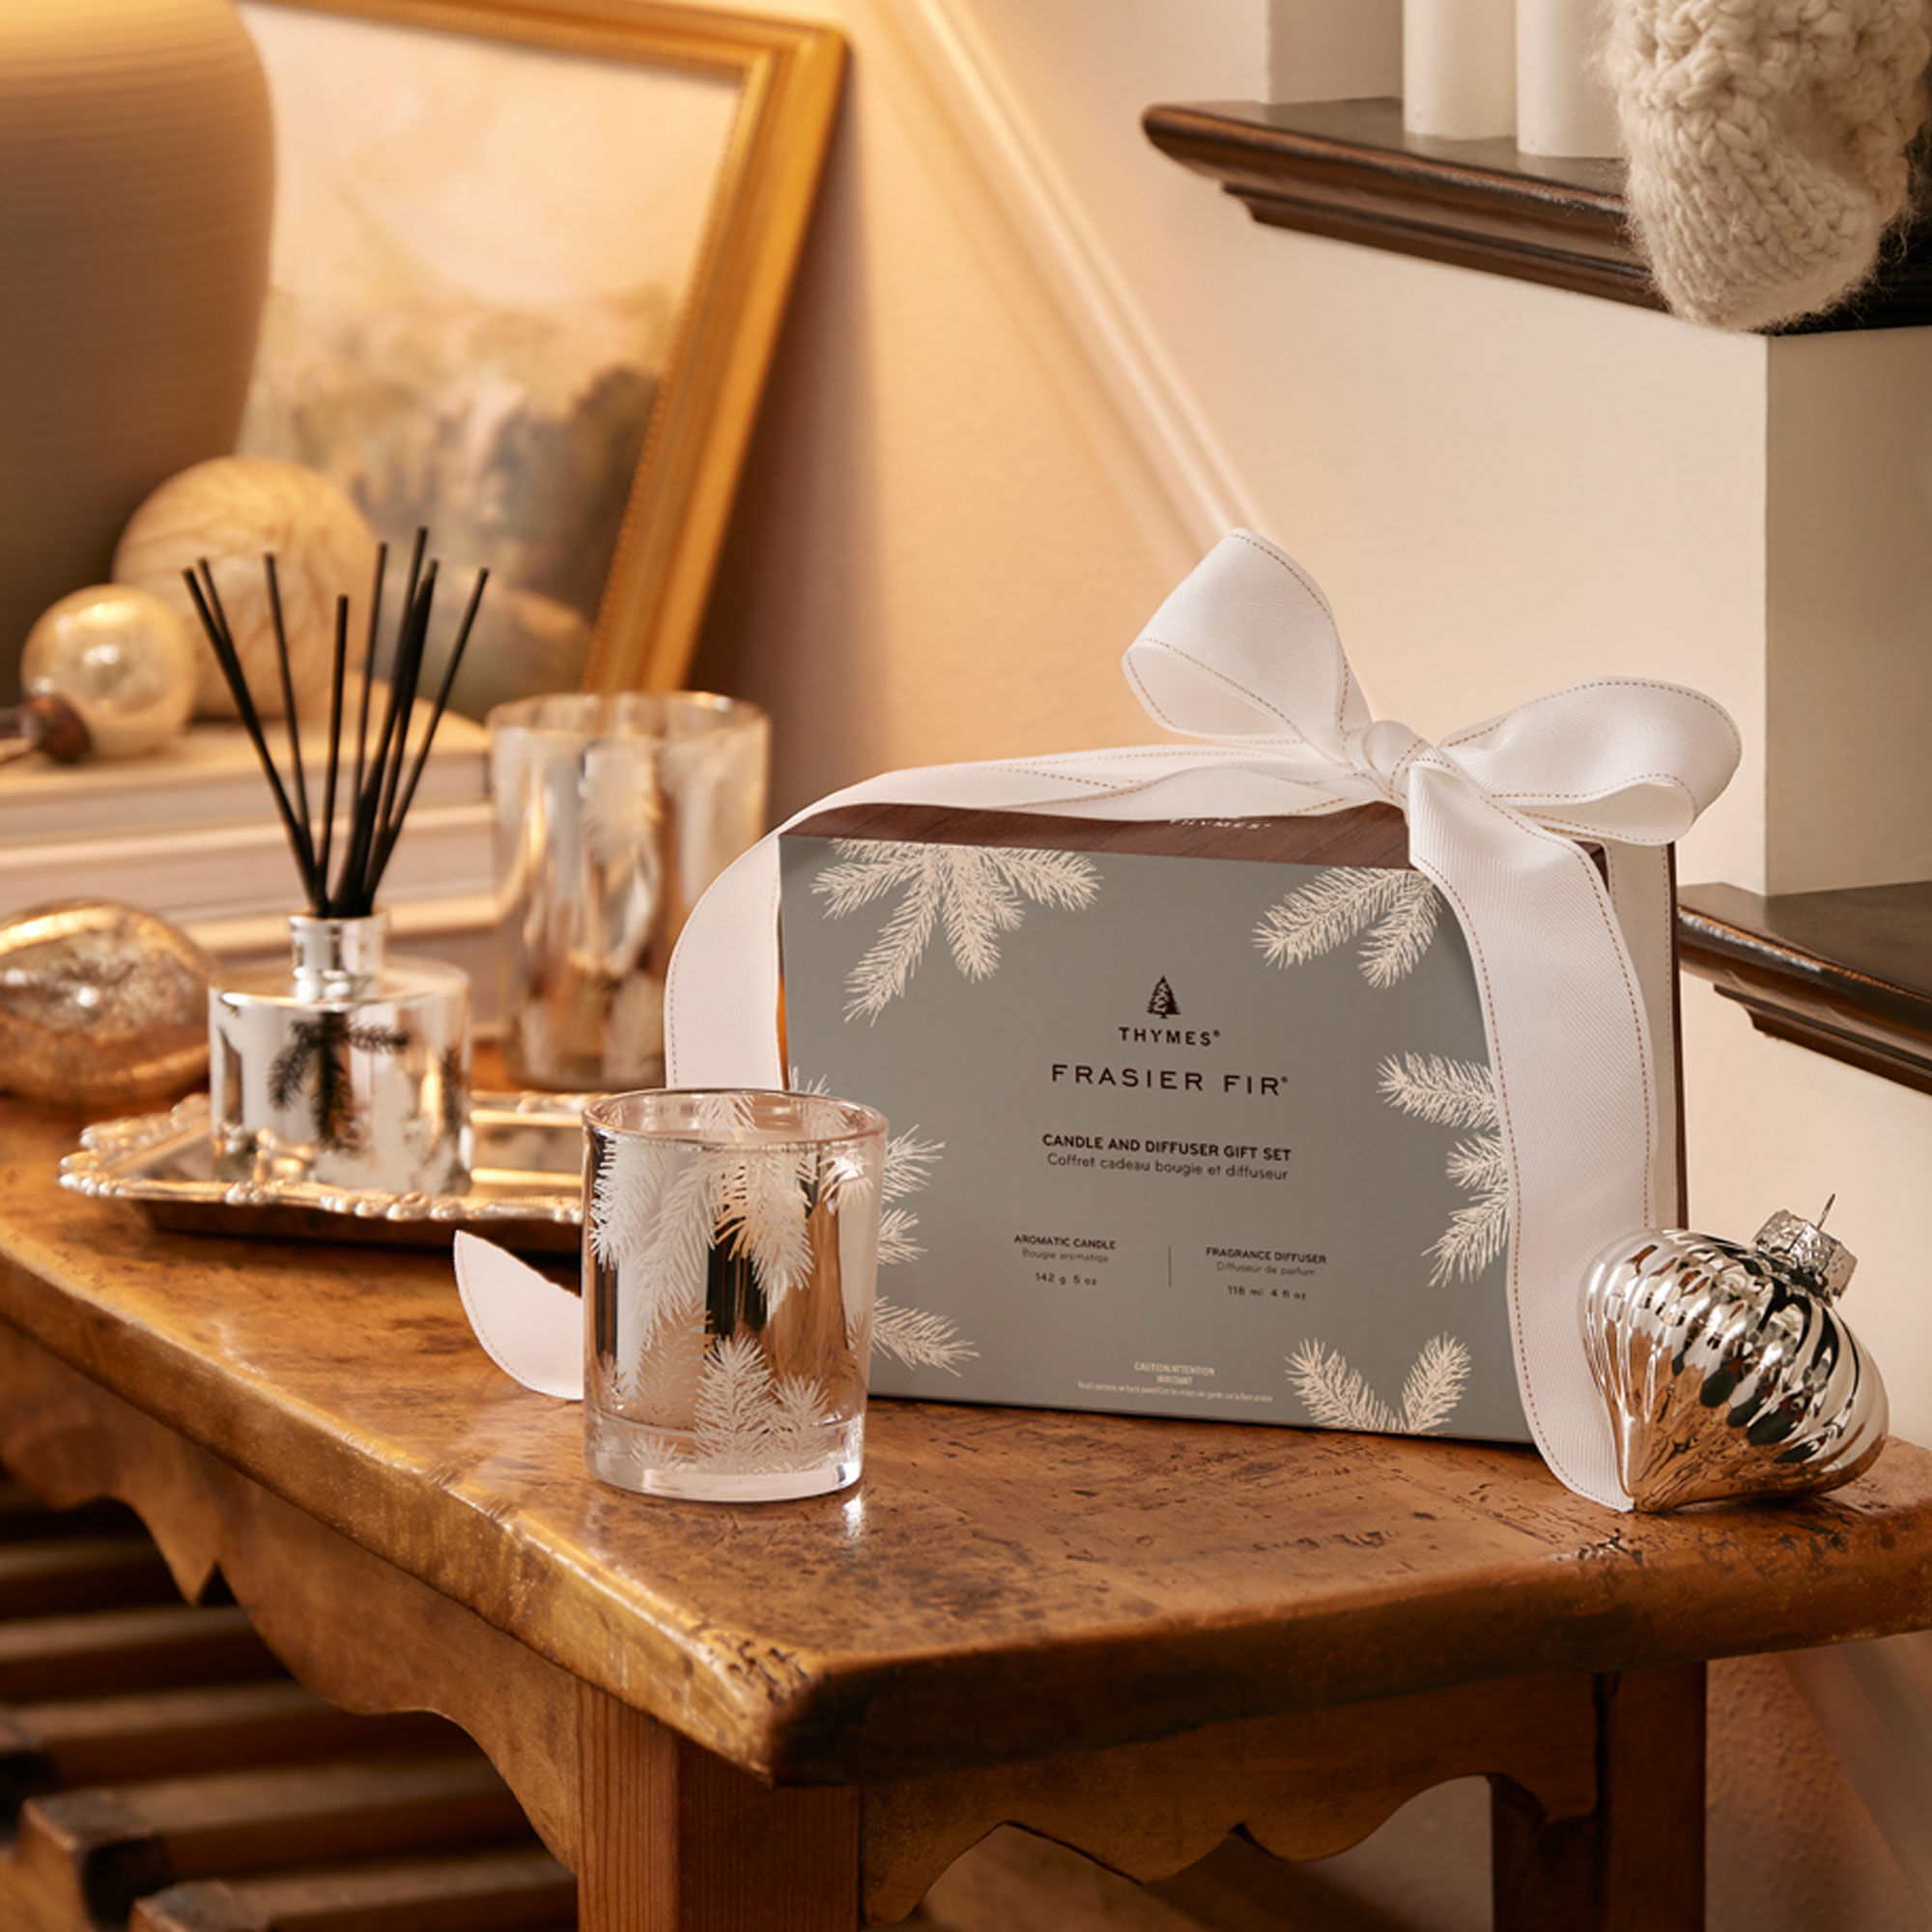 Discover more than 170 diffuser gift set